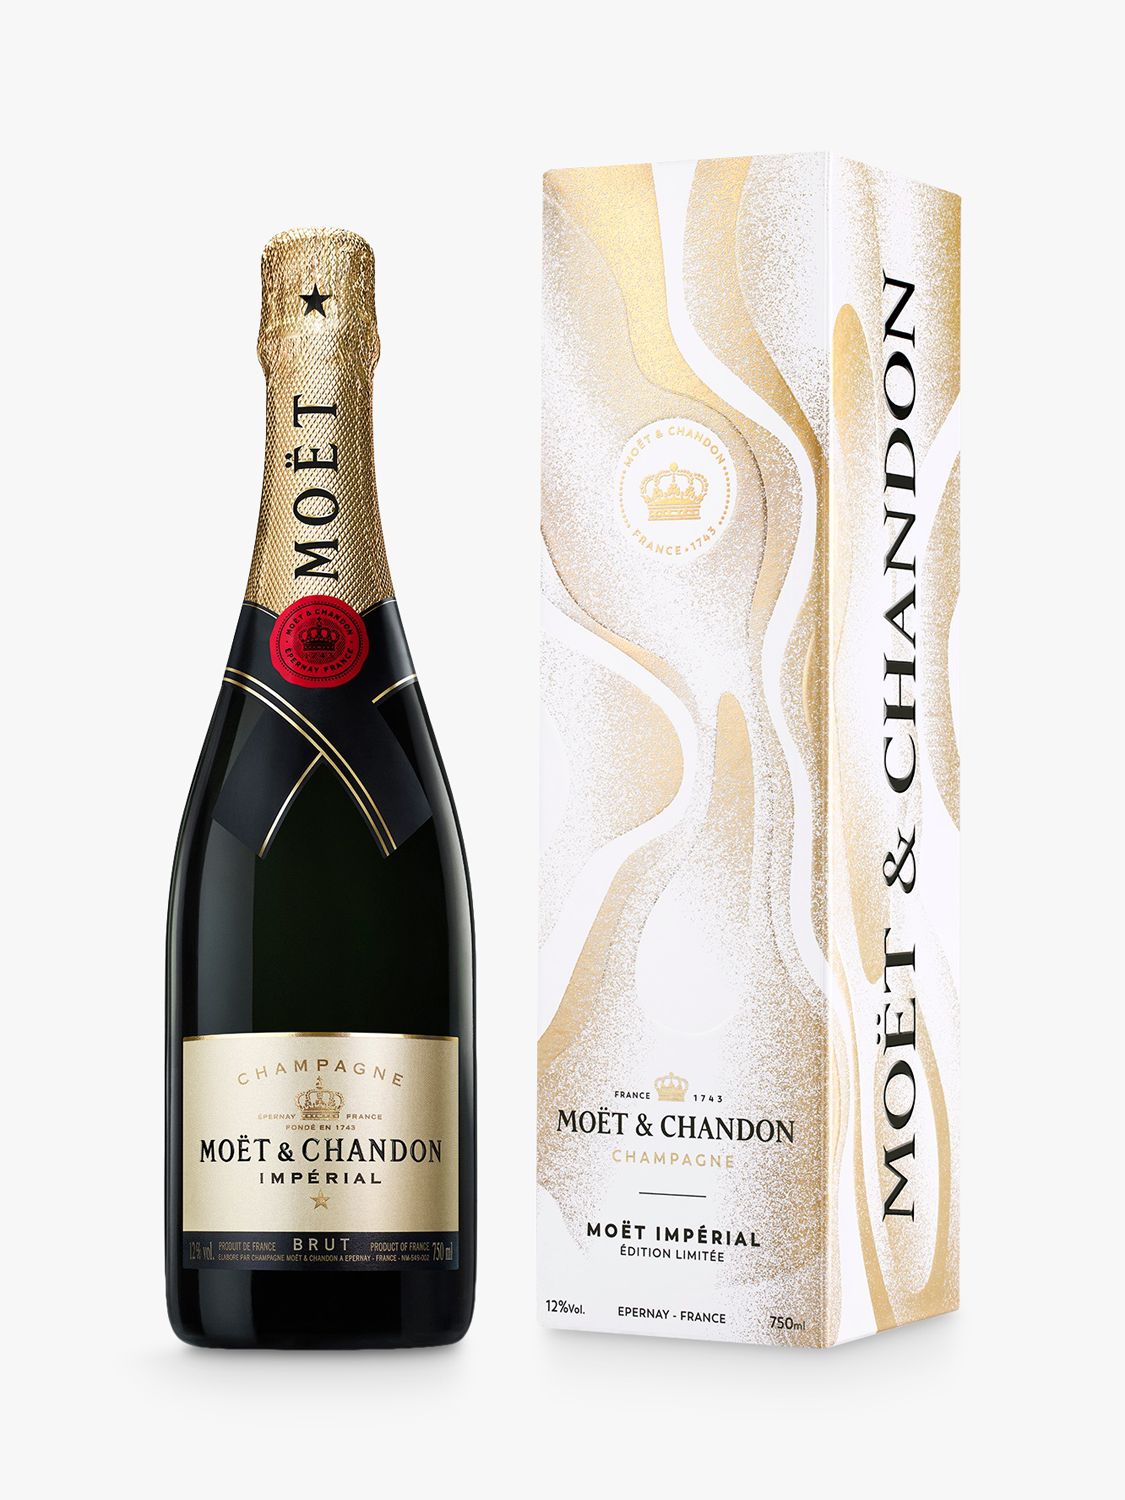 Moet & Chandon Brut Rose Champagne Imperial - The Jug Store, Malone, NY,  Malone, NY